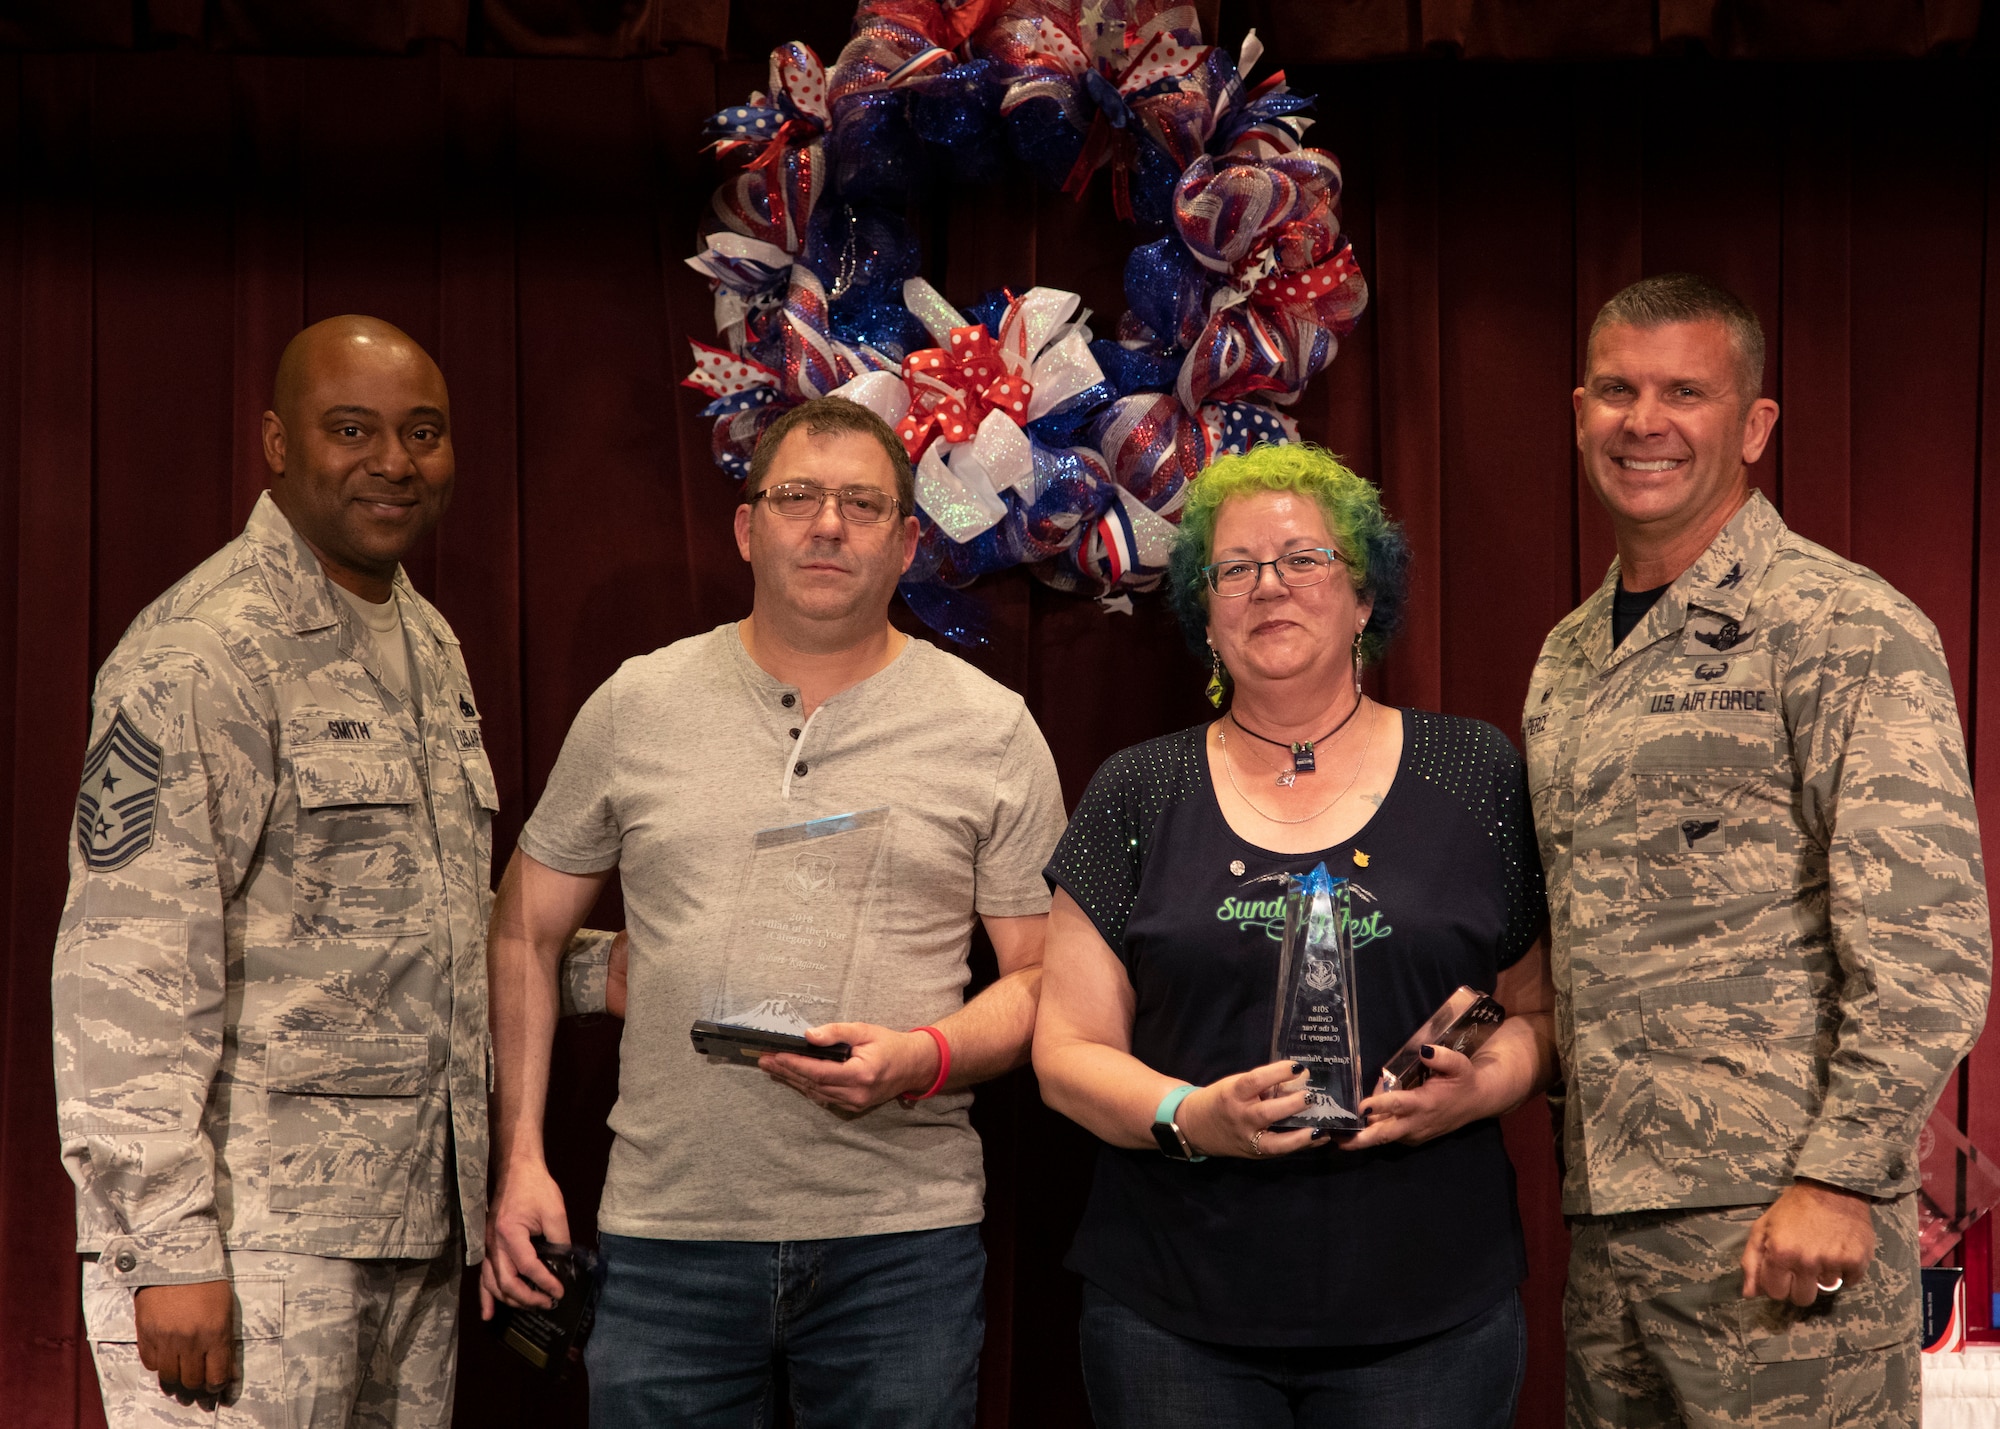 Kagarise and Hulsmann both tied for the annual award of Civilian of the Year (category 1).